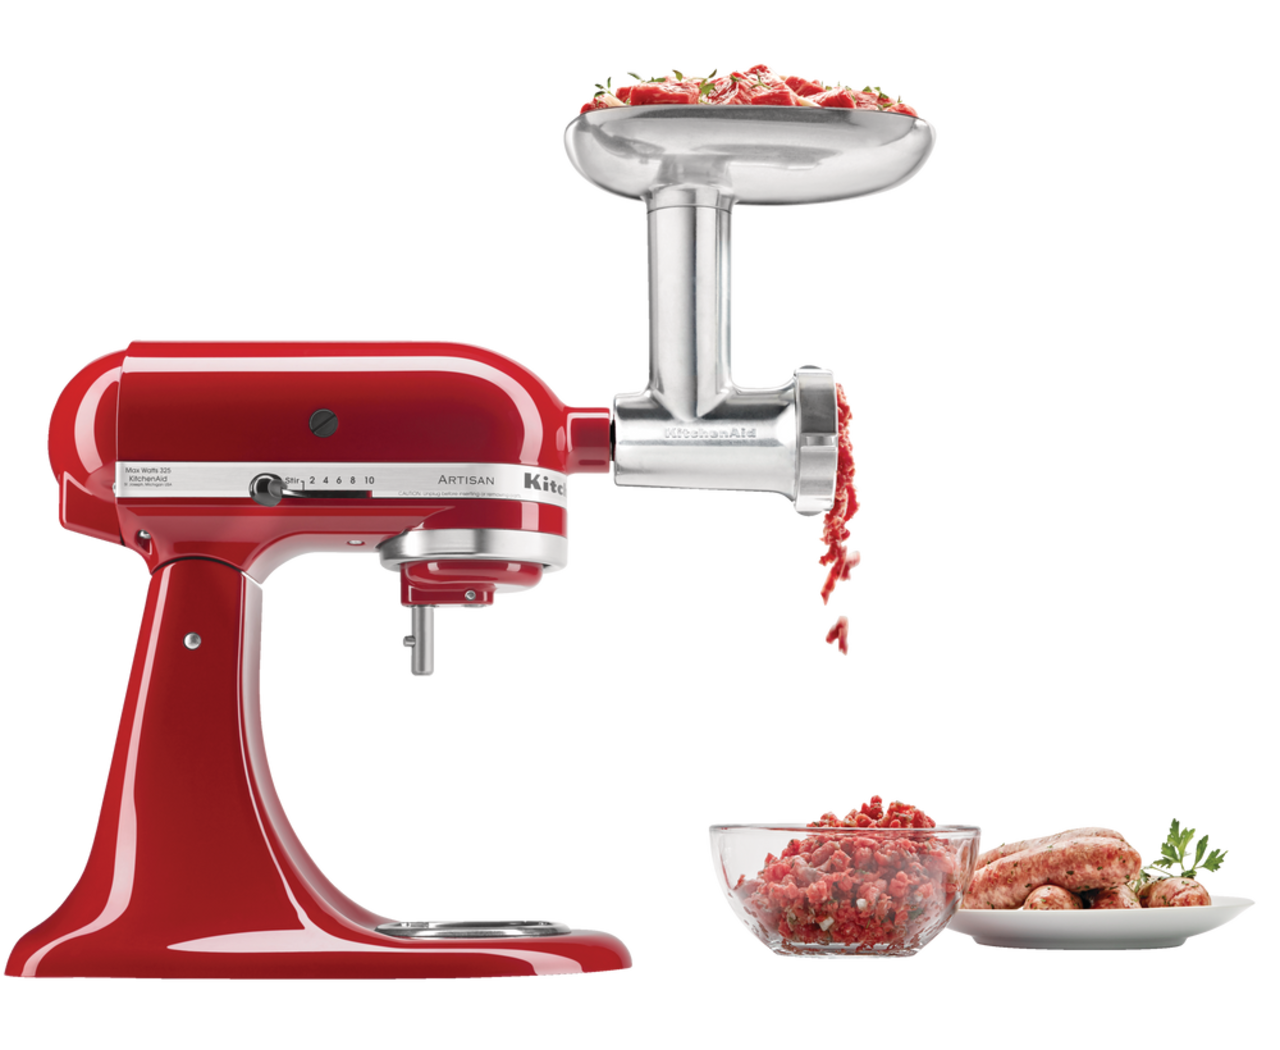 iVict Food Meat Grinder Attachment Compatible for KitchenAid Stand